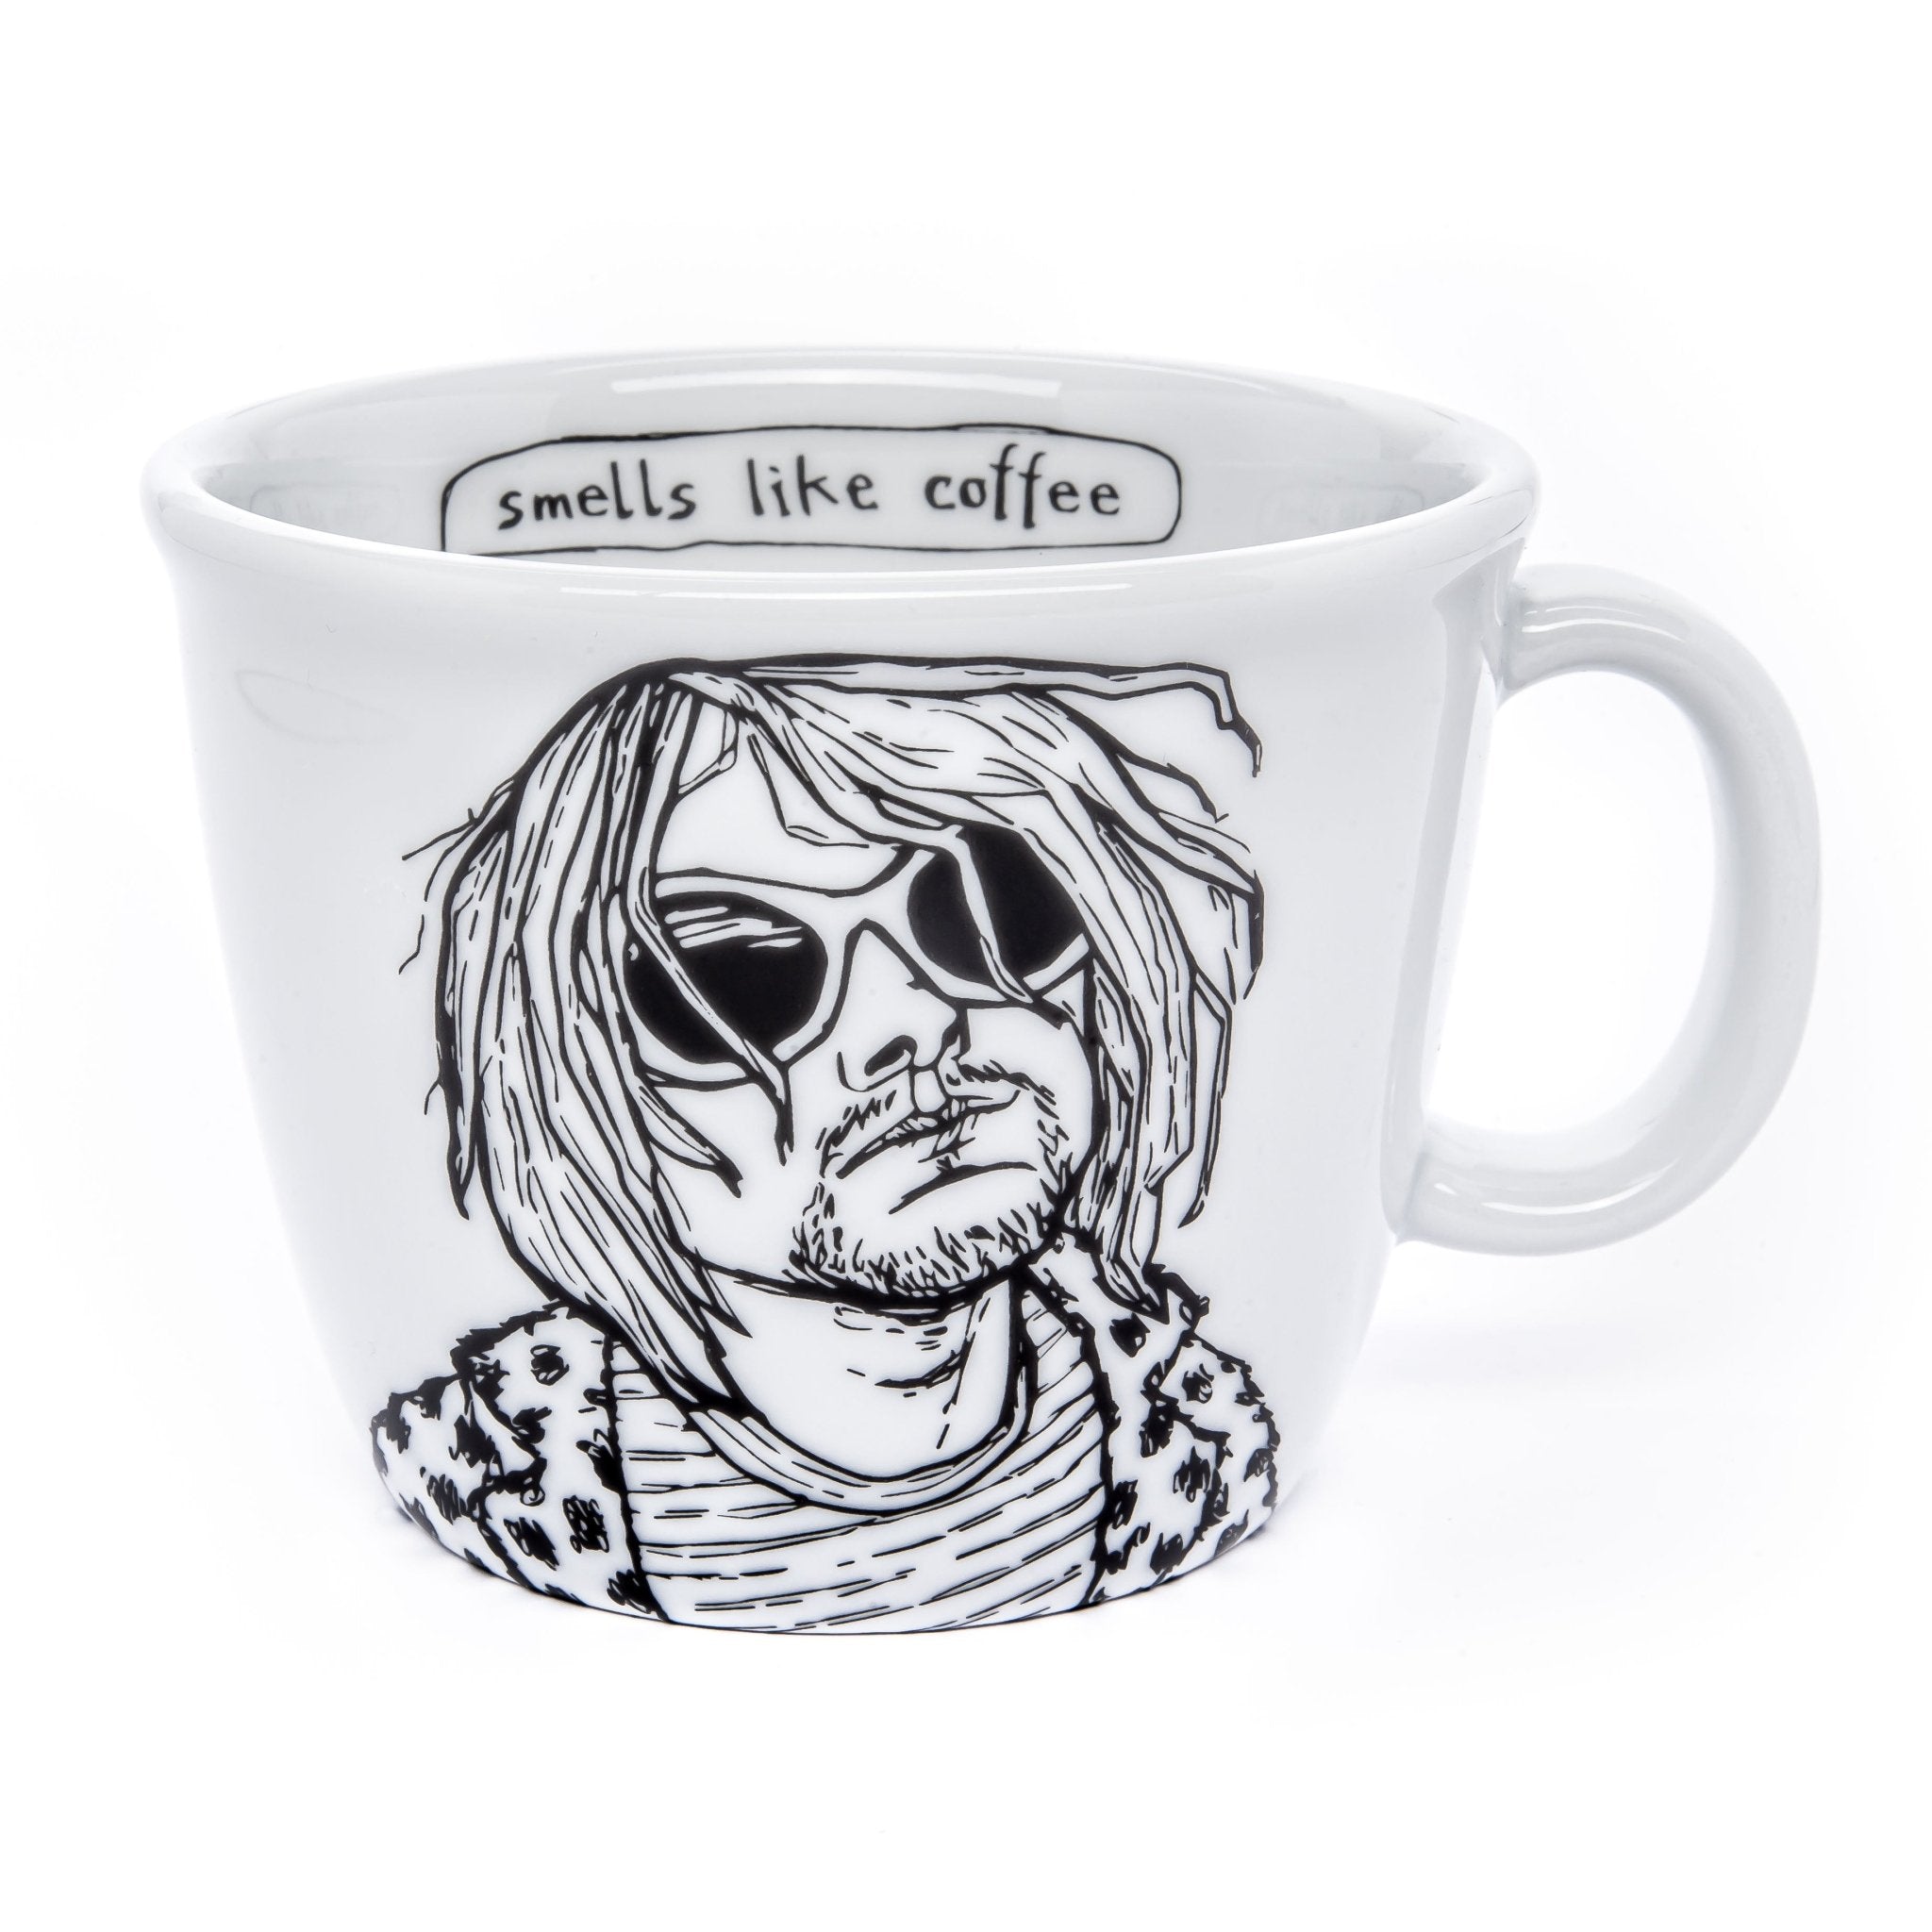 Porcelain cup inspired by Kurt Cobain